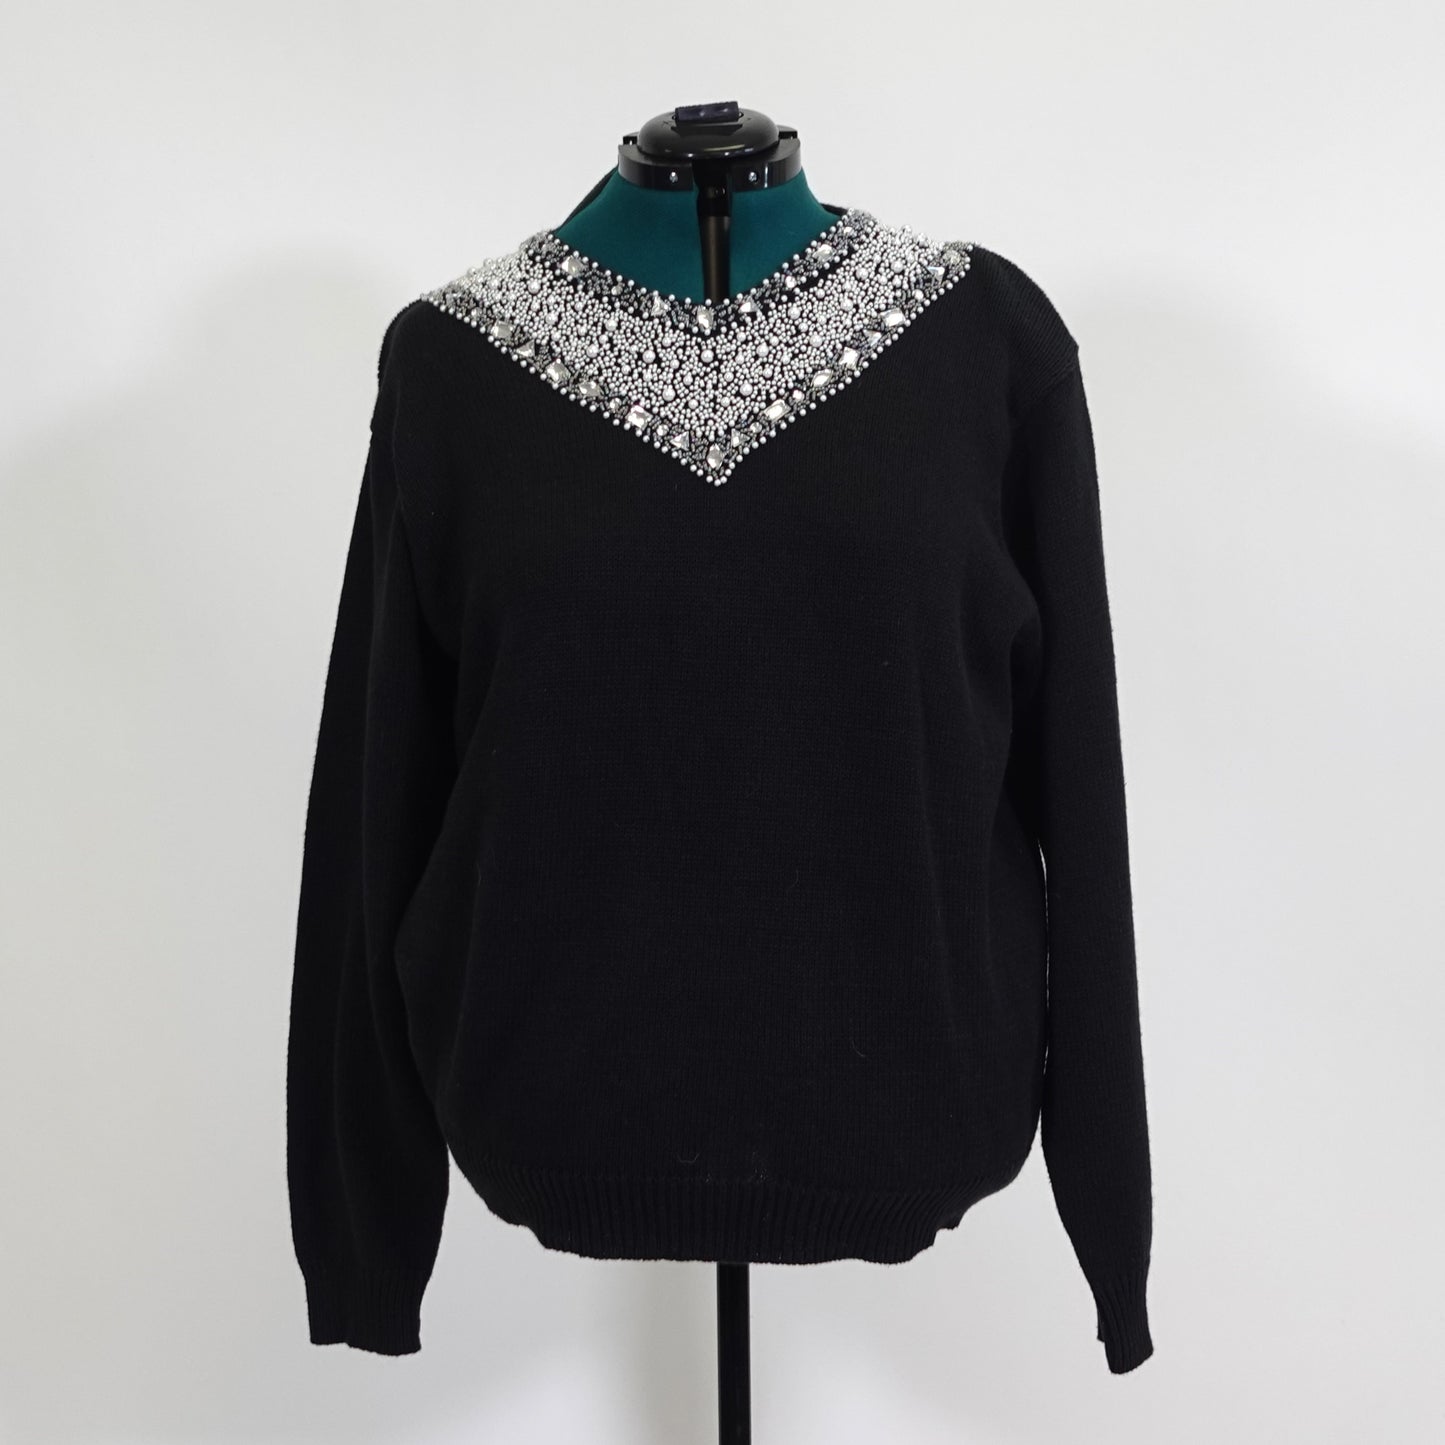 Vintage Black Sweater with Rhinestone and Pearl Details